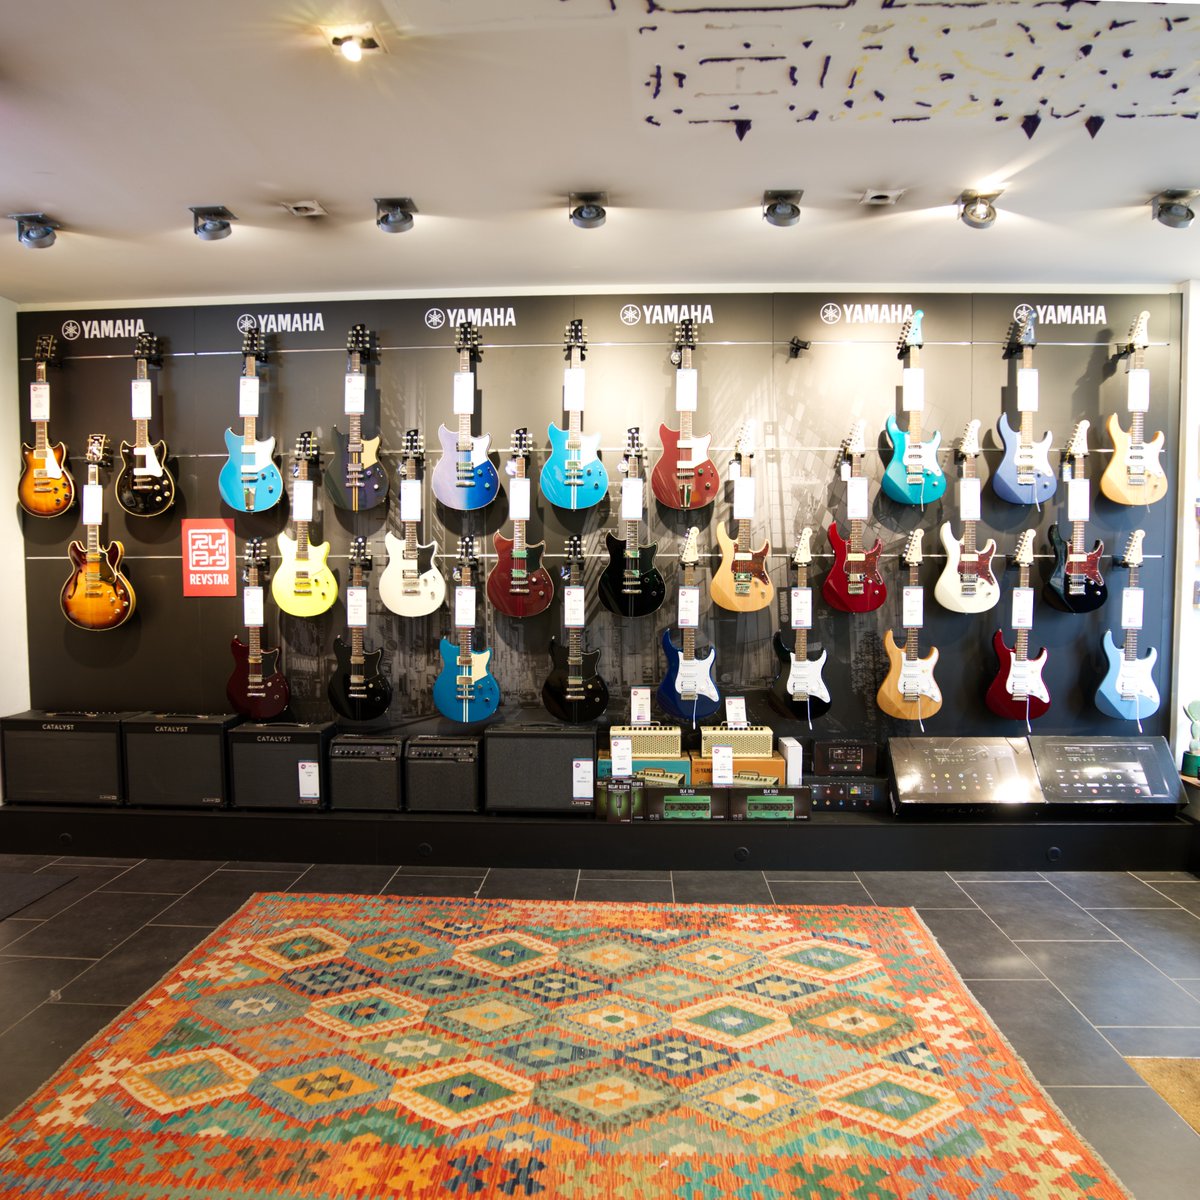 The shop change is getting more and more in its final stadium. Watch this huge wall of the finest Yamaha electric guitars available ! #groovestreet98 #thebrusselsguitarshop #guitarshop #YAMAHA #revstar #yamahamusiceurope #DL4MkII #yamaharevstar #yamahasa2200 #yamahapacifica